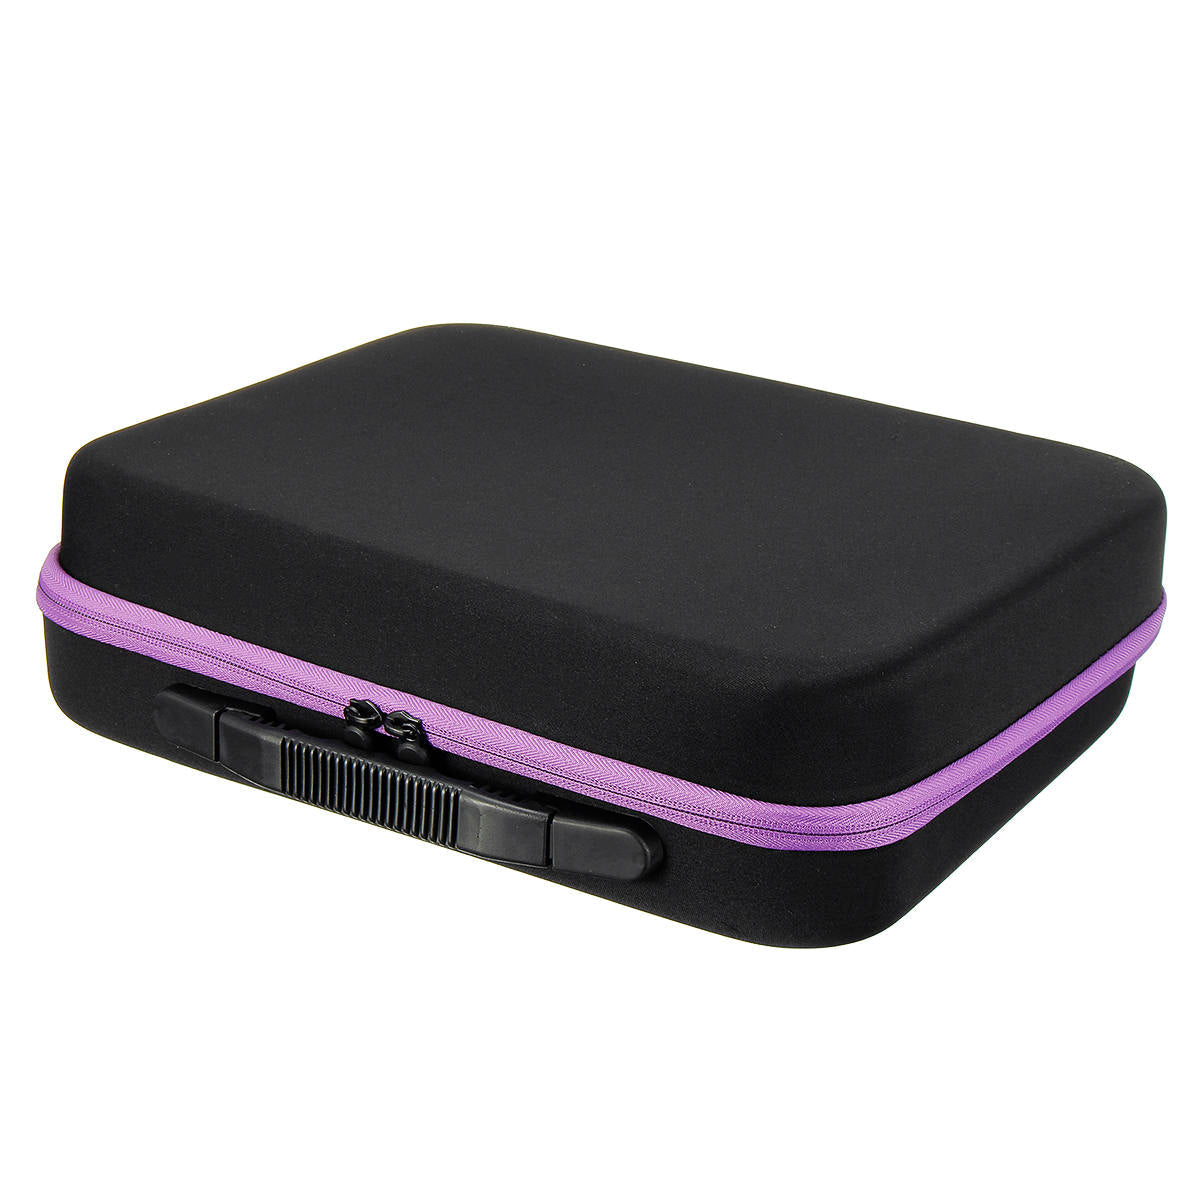 Portable Carrying Storage Case Bag Box For 70pcs 5ml Essential Oil Bottles with Bottle Opener & Bottle Stickers